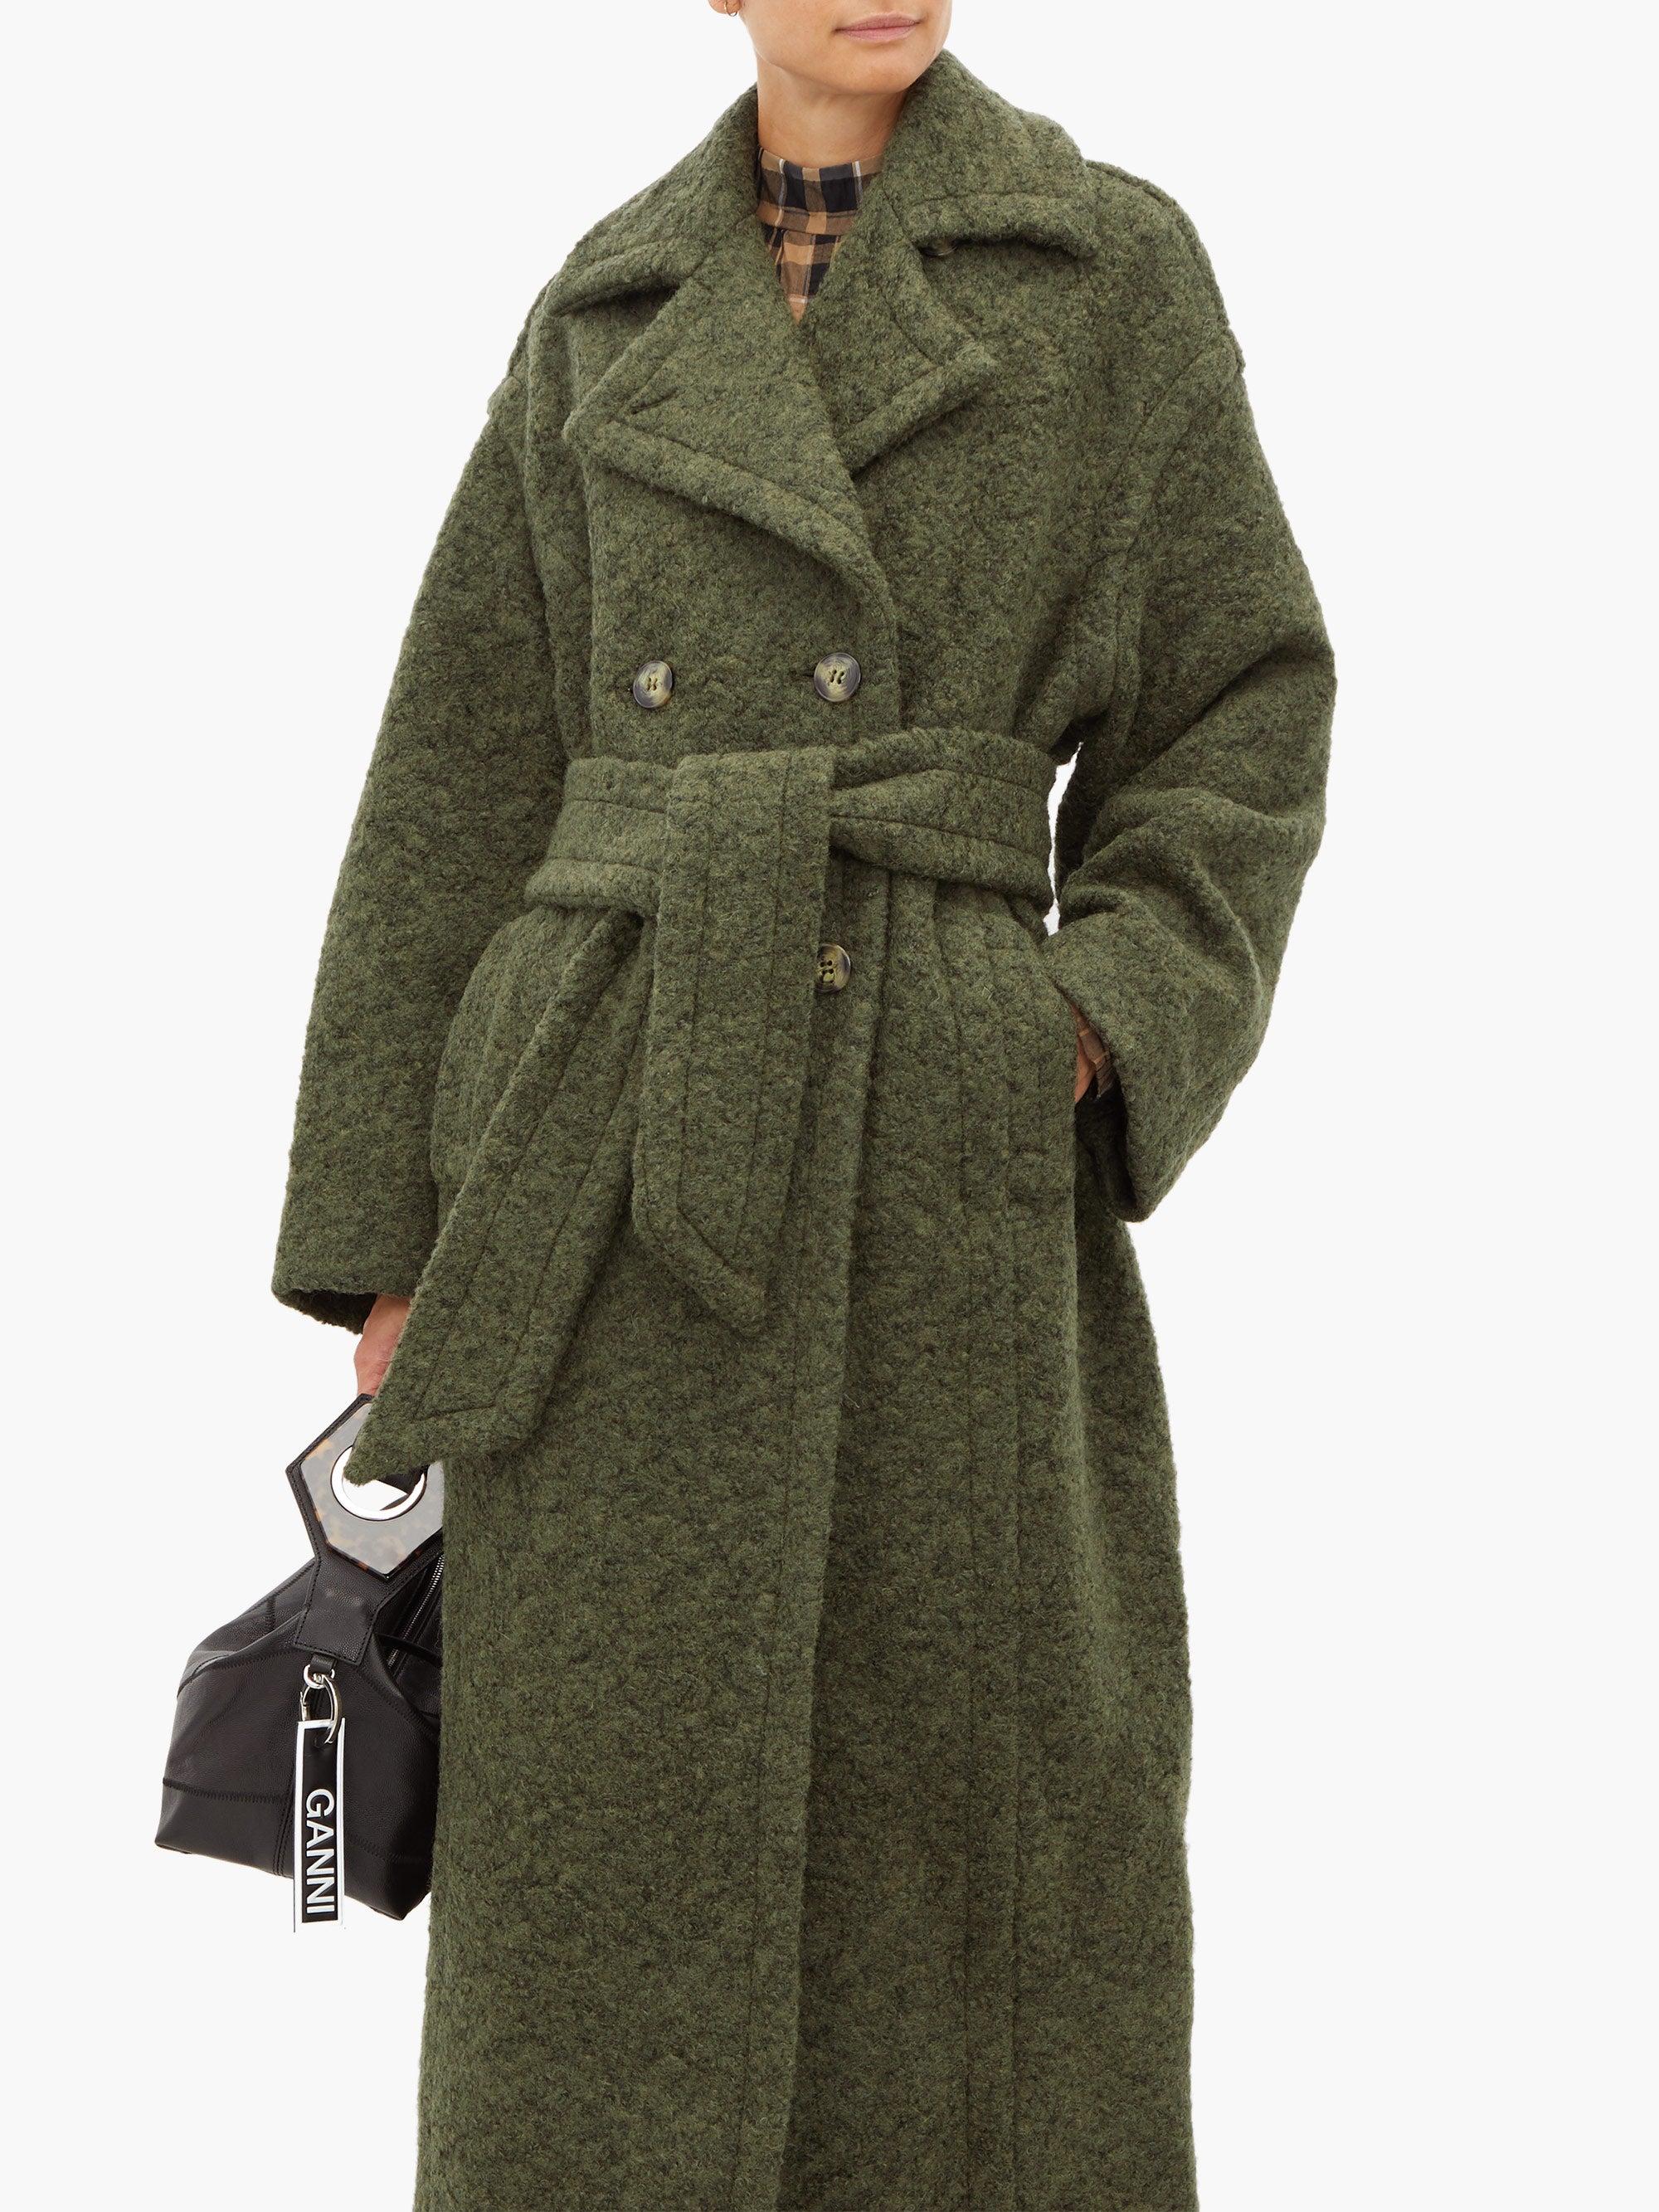 Ganni Belted Double-breasted Wool-blend Coat in Khaki (Green) | Lyst